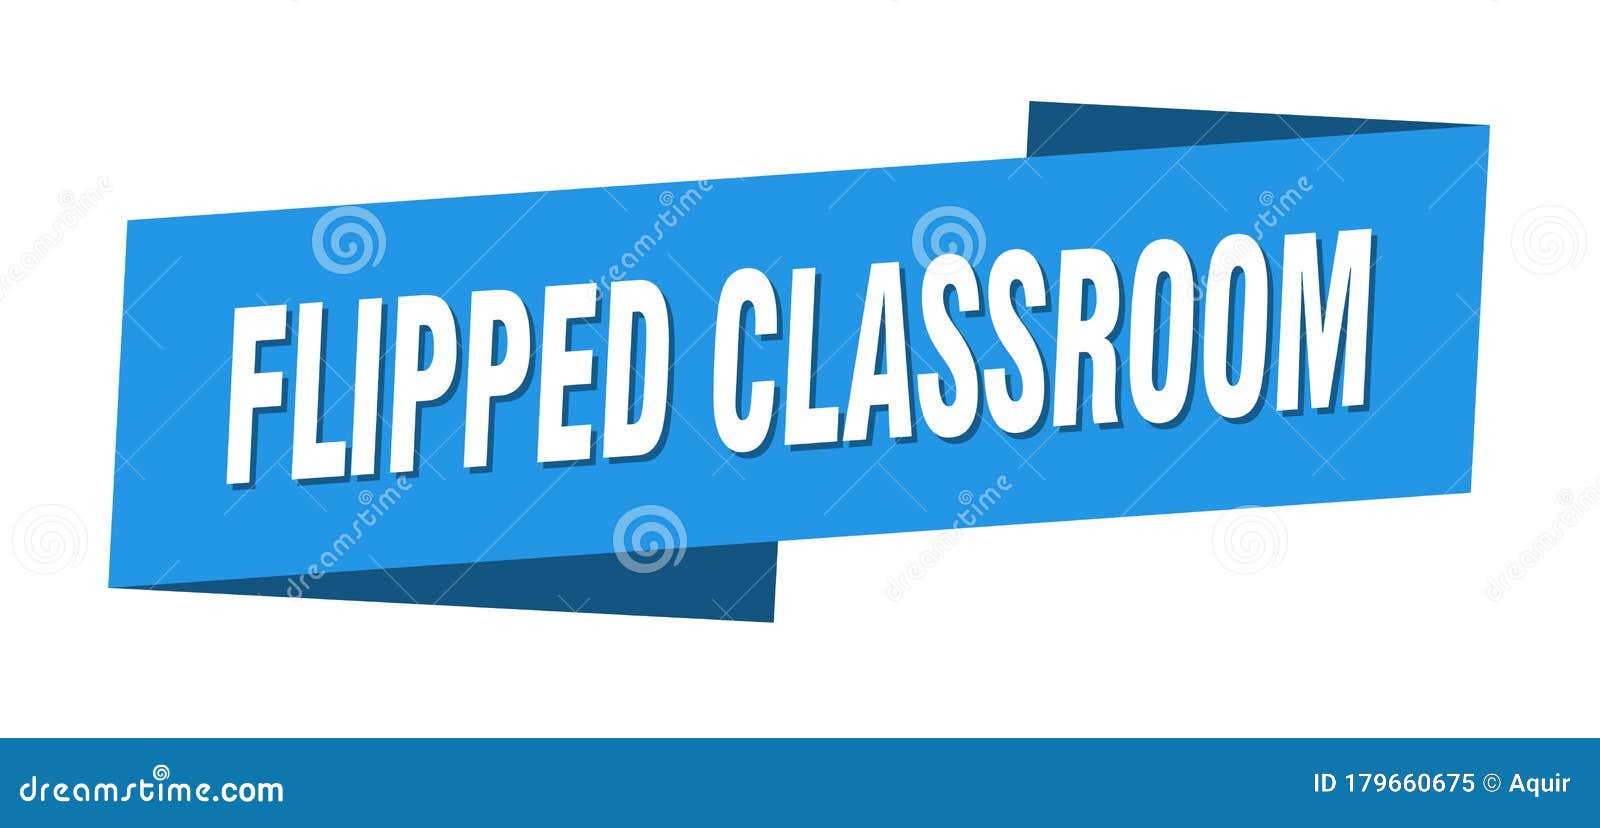 Flipped Classroom Banner Template. Flipped Classroom Ribbon Label Intended For Classroom Banner Template